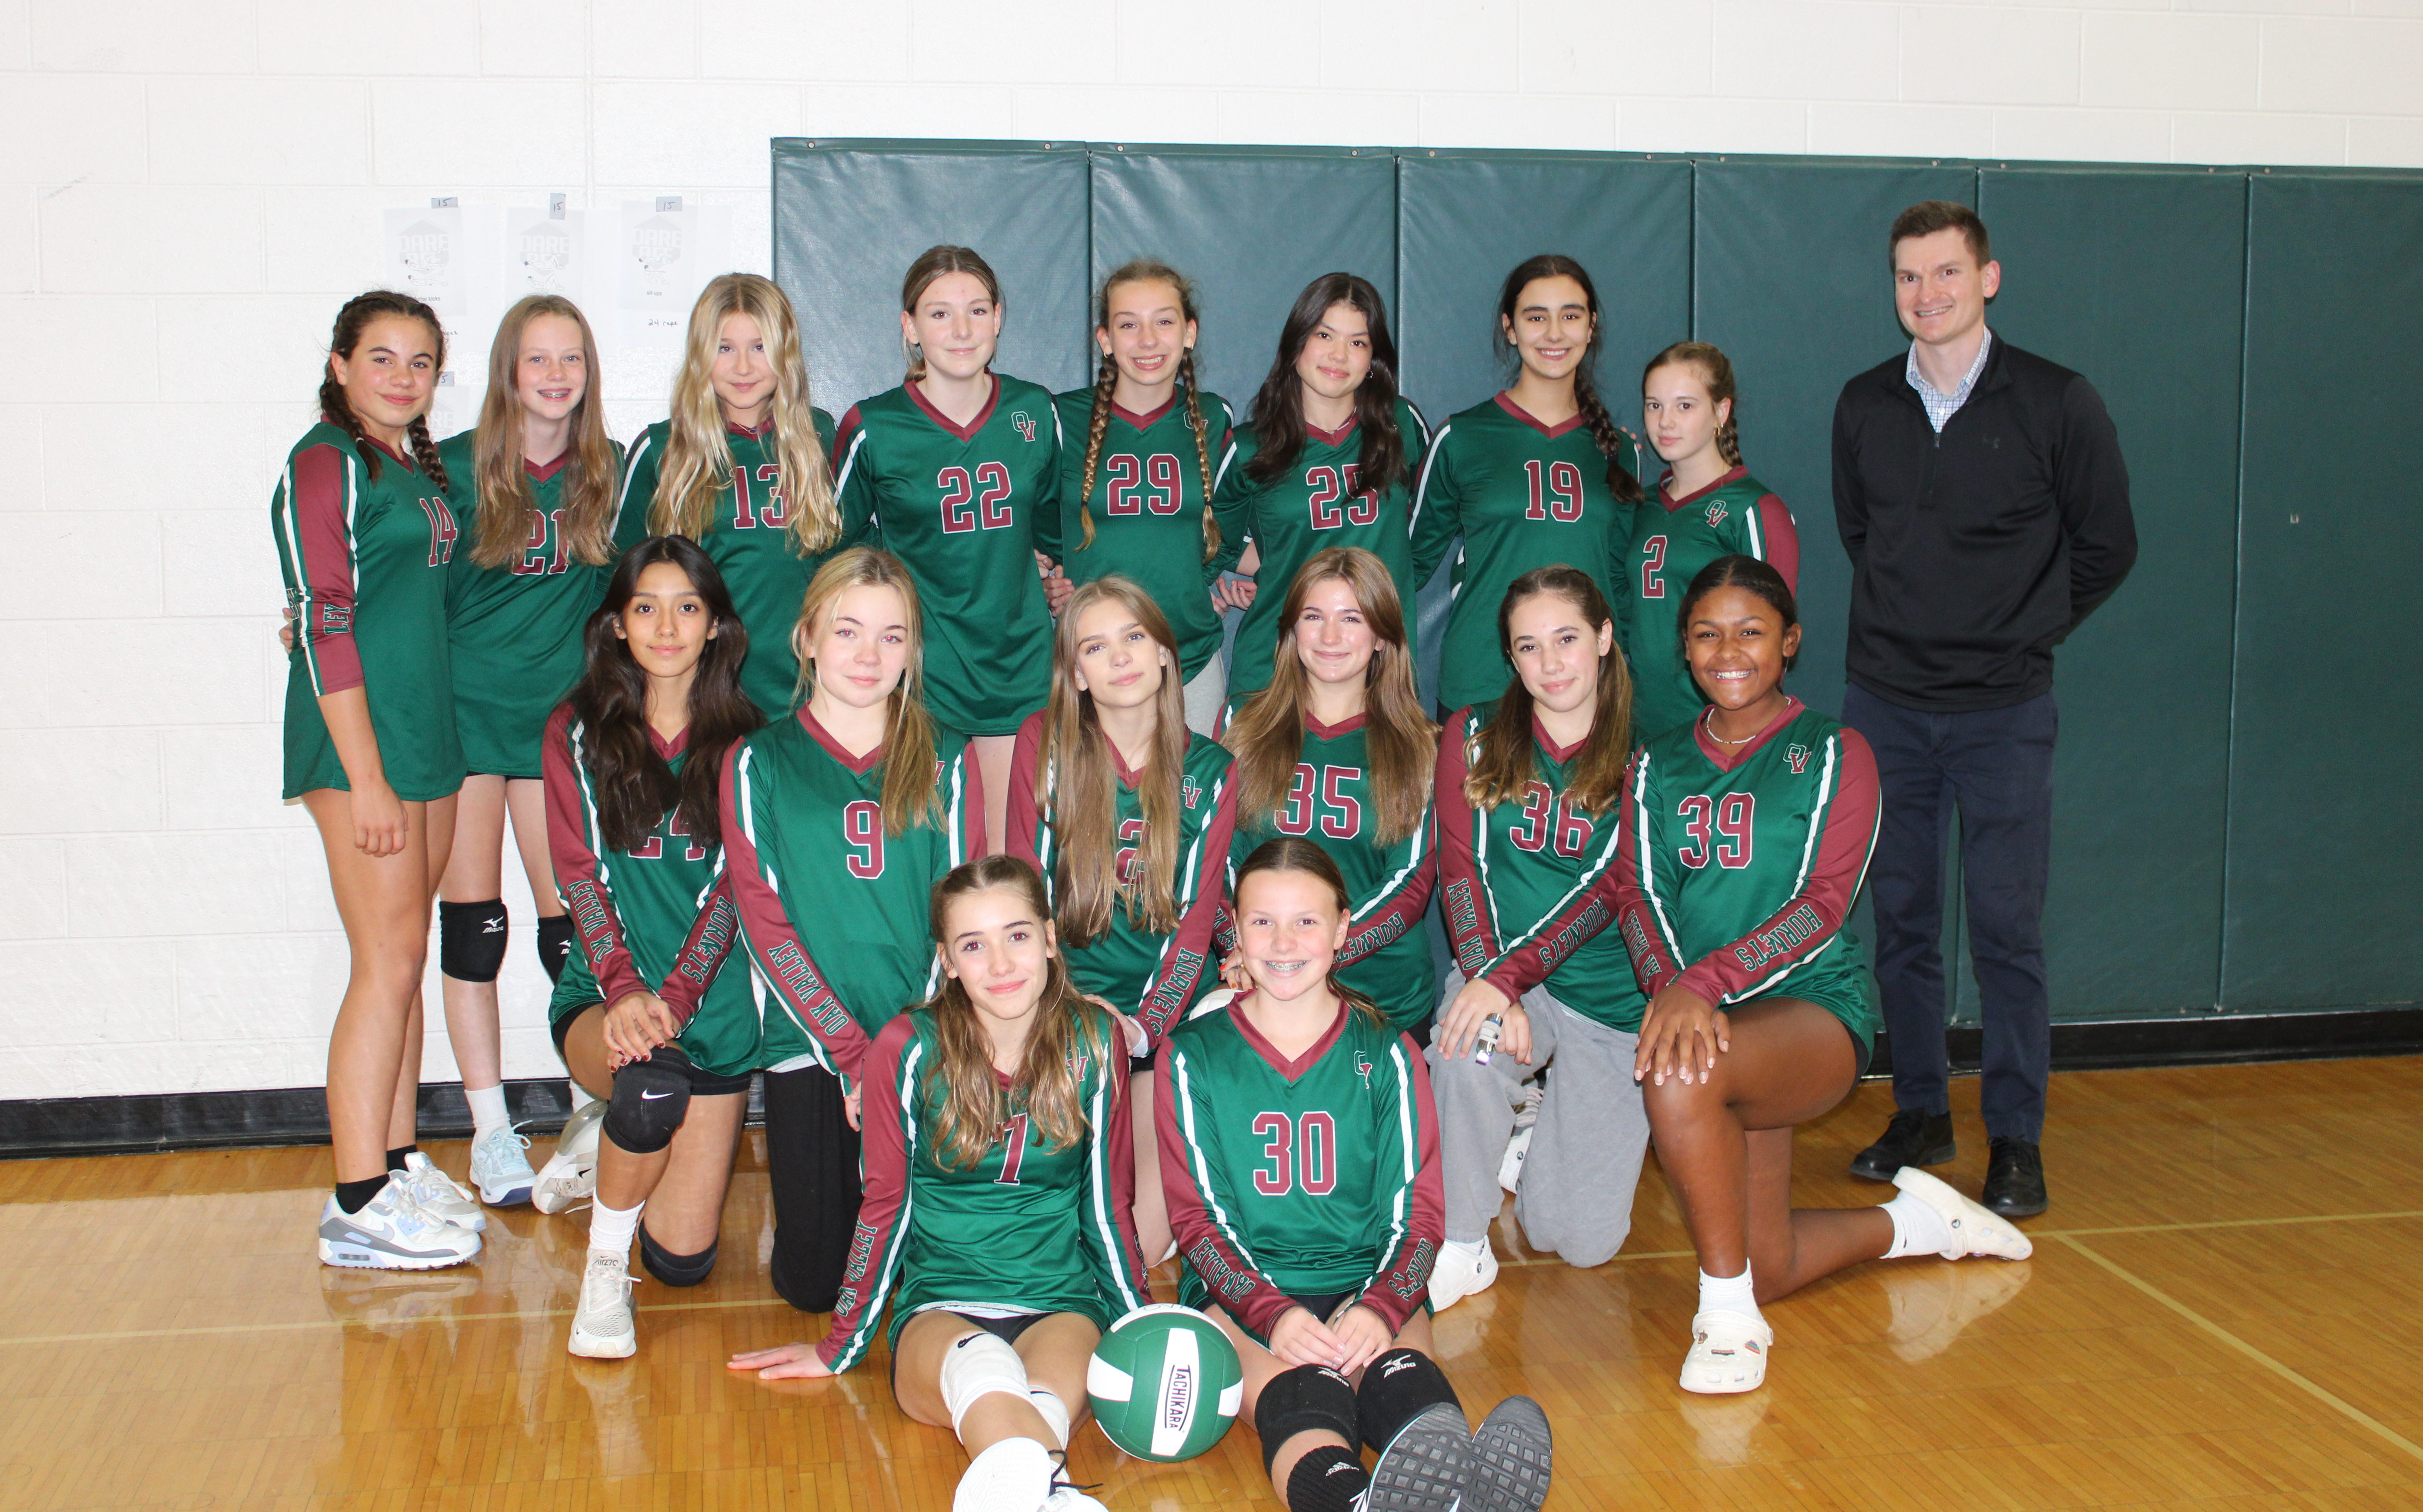 8th grade volleyball team poses together